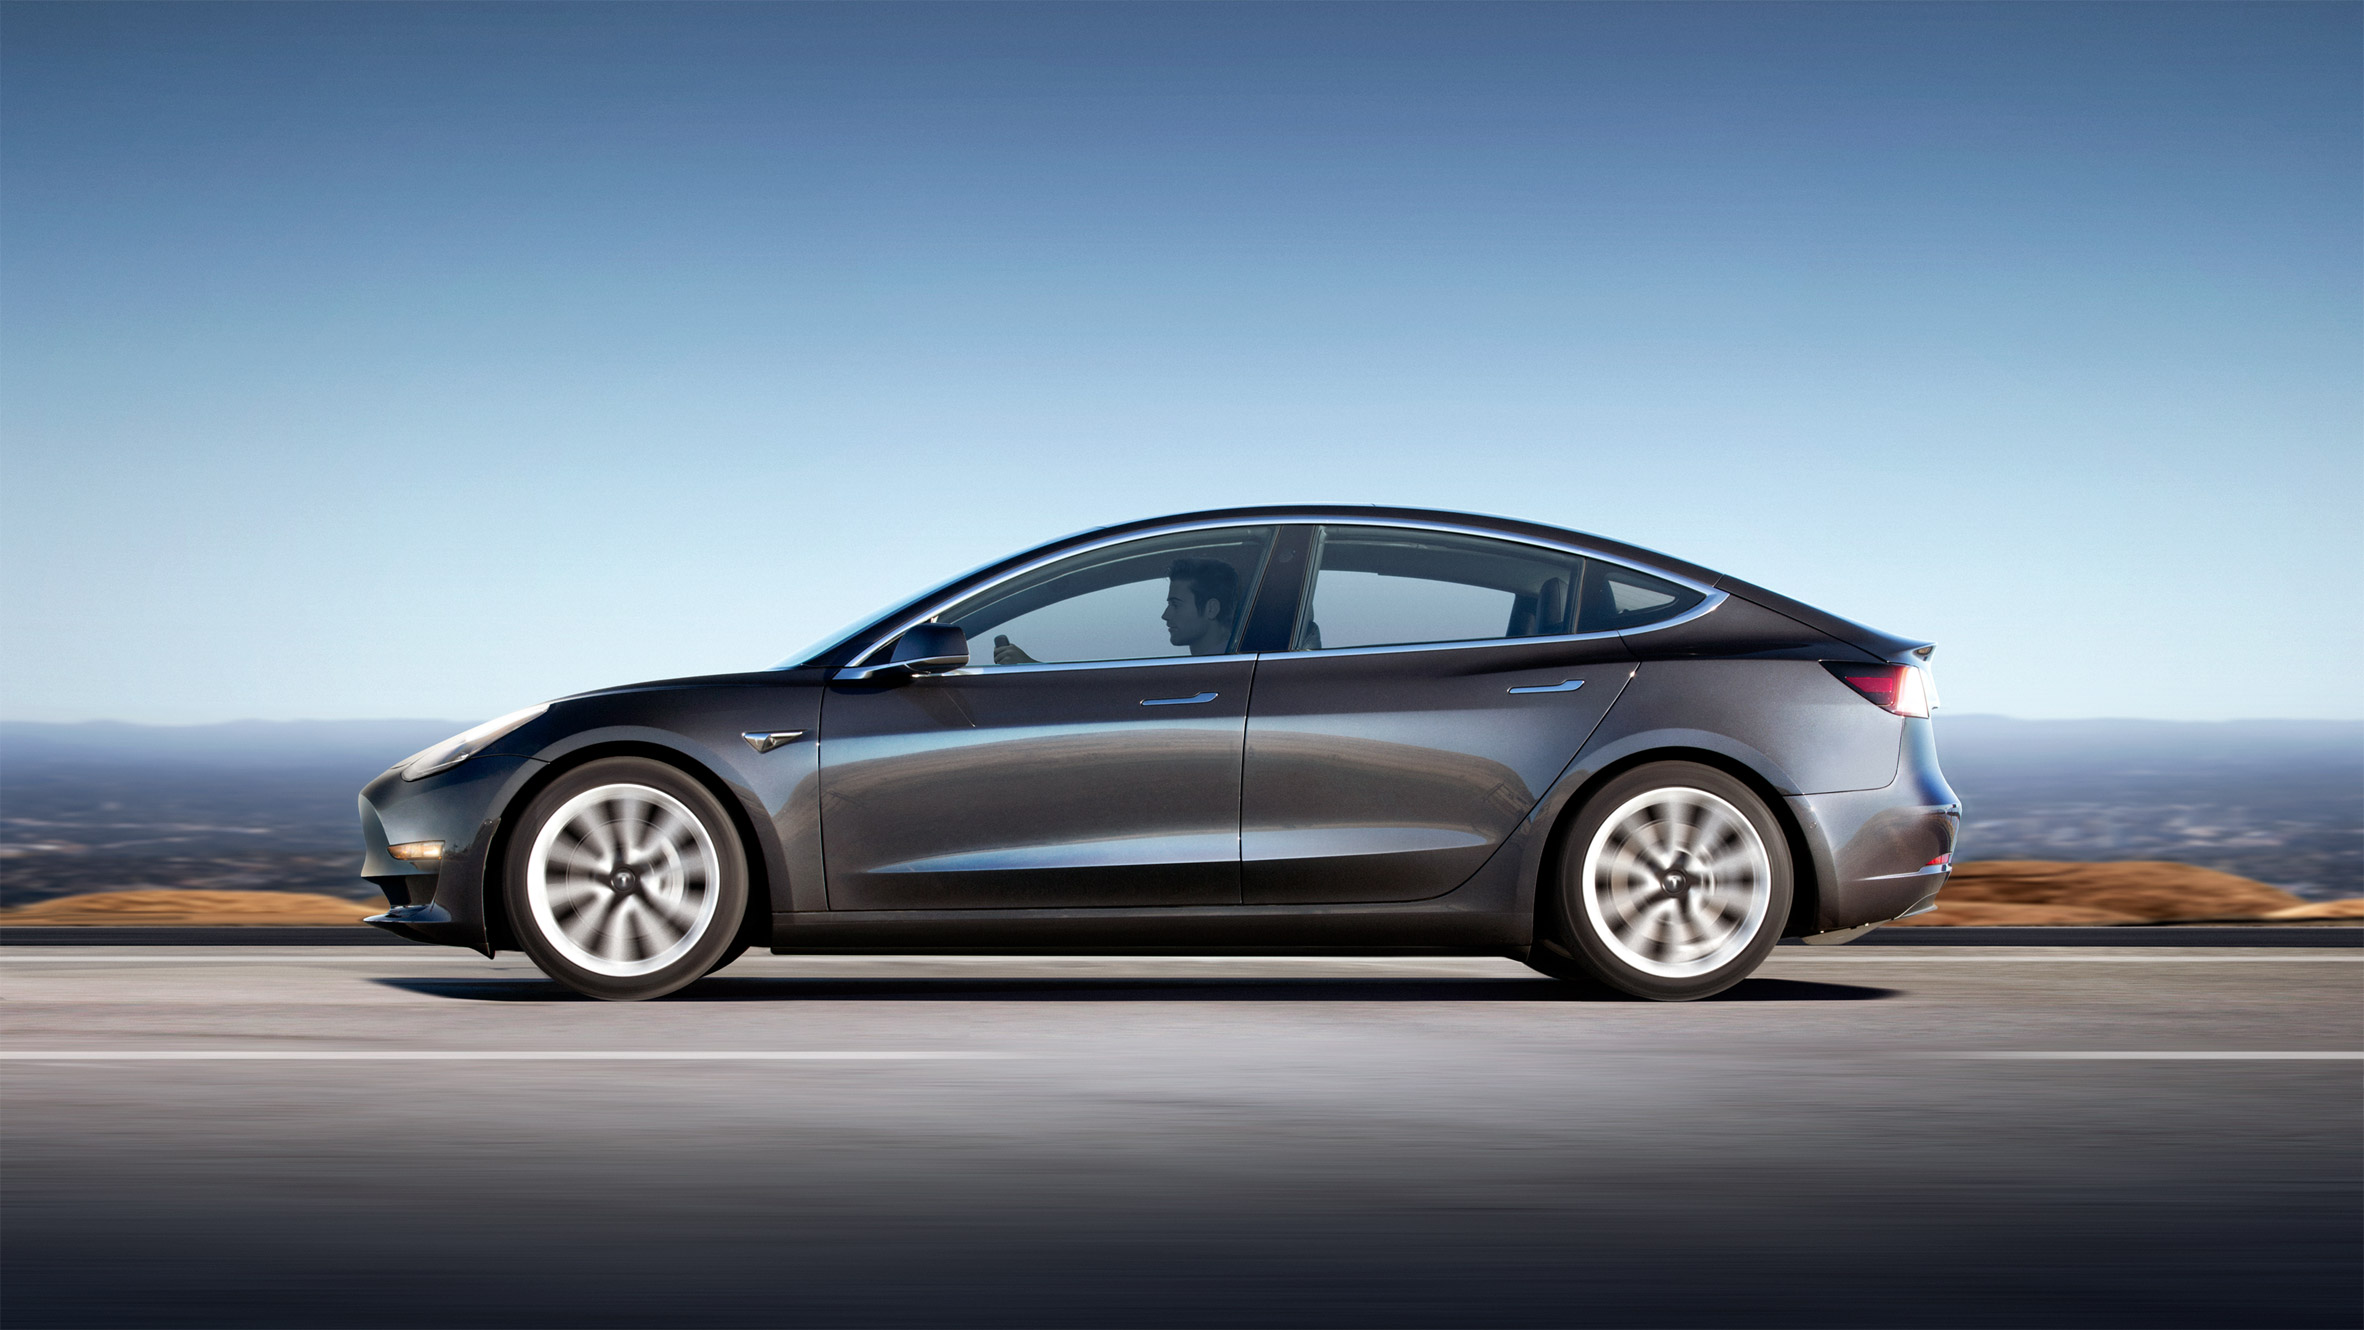 Tesla unveils first mass-market electric vehicle the Model 3